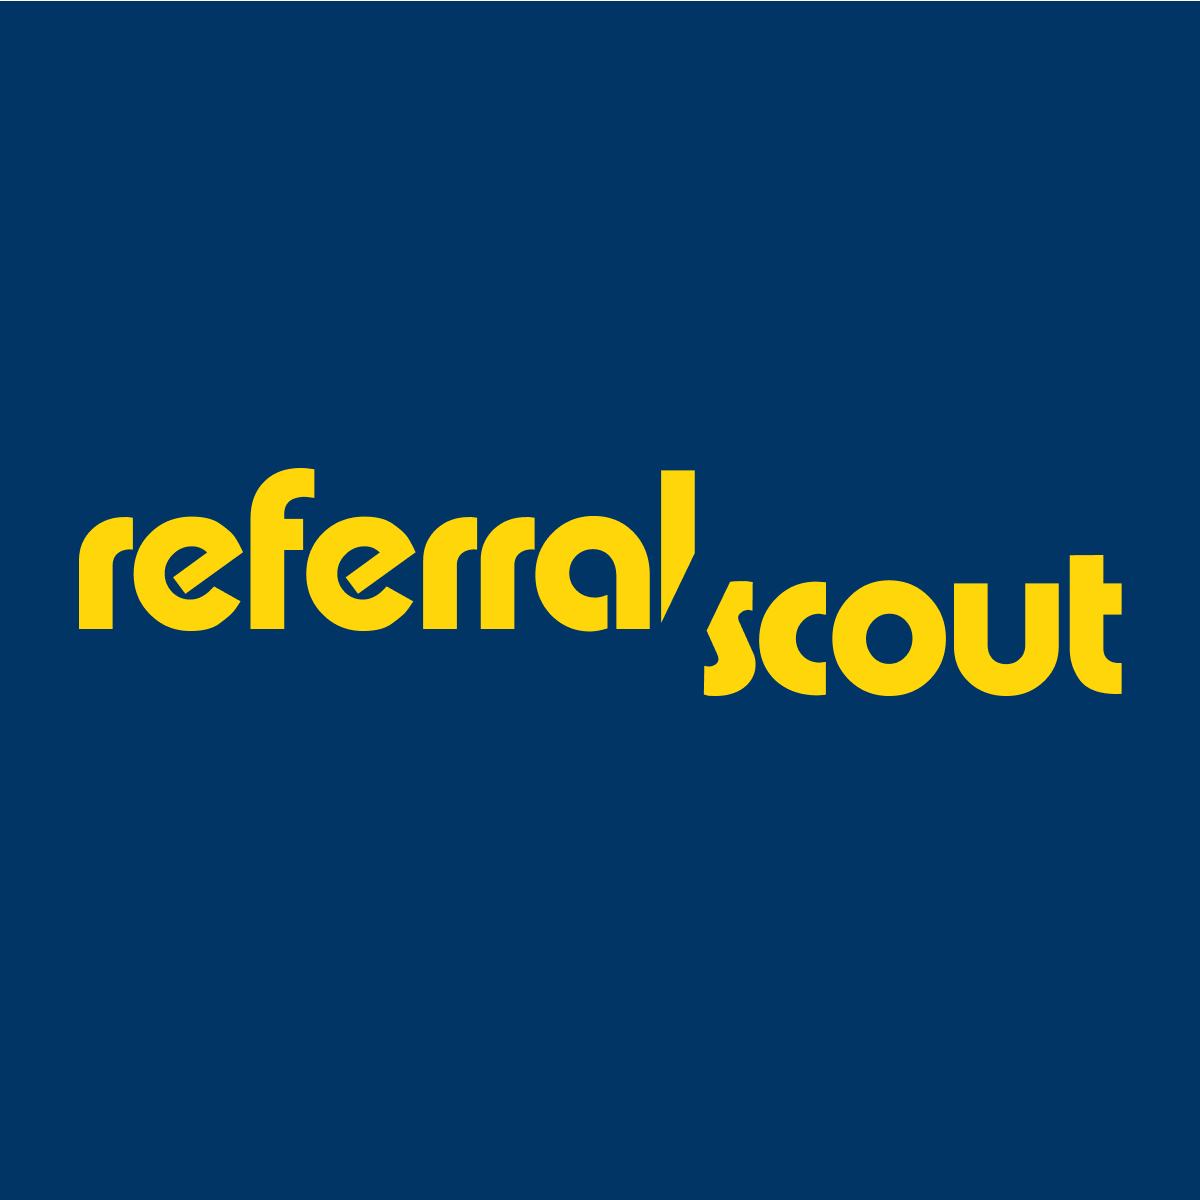 Referral Scout